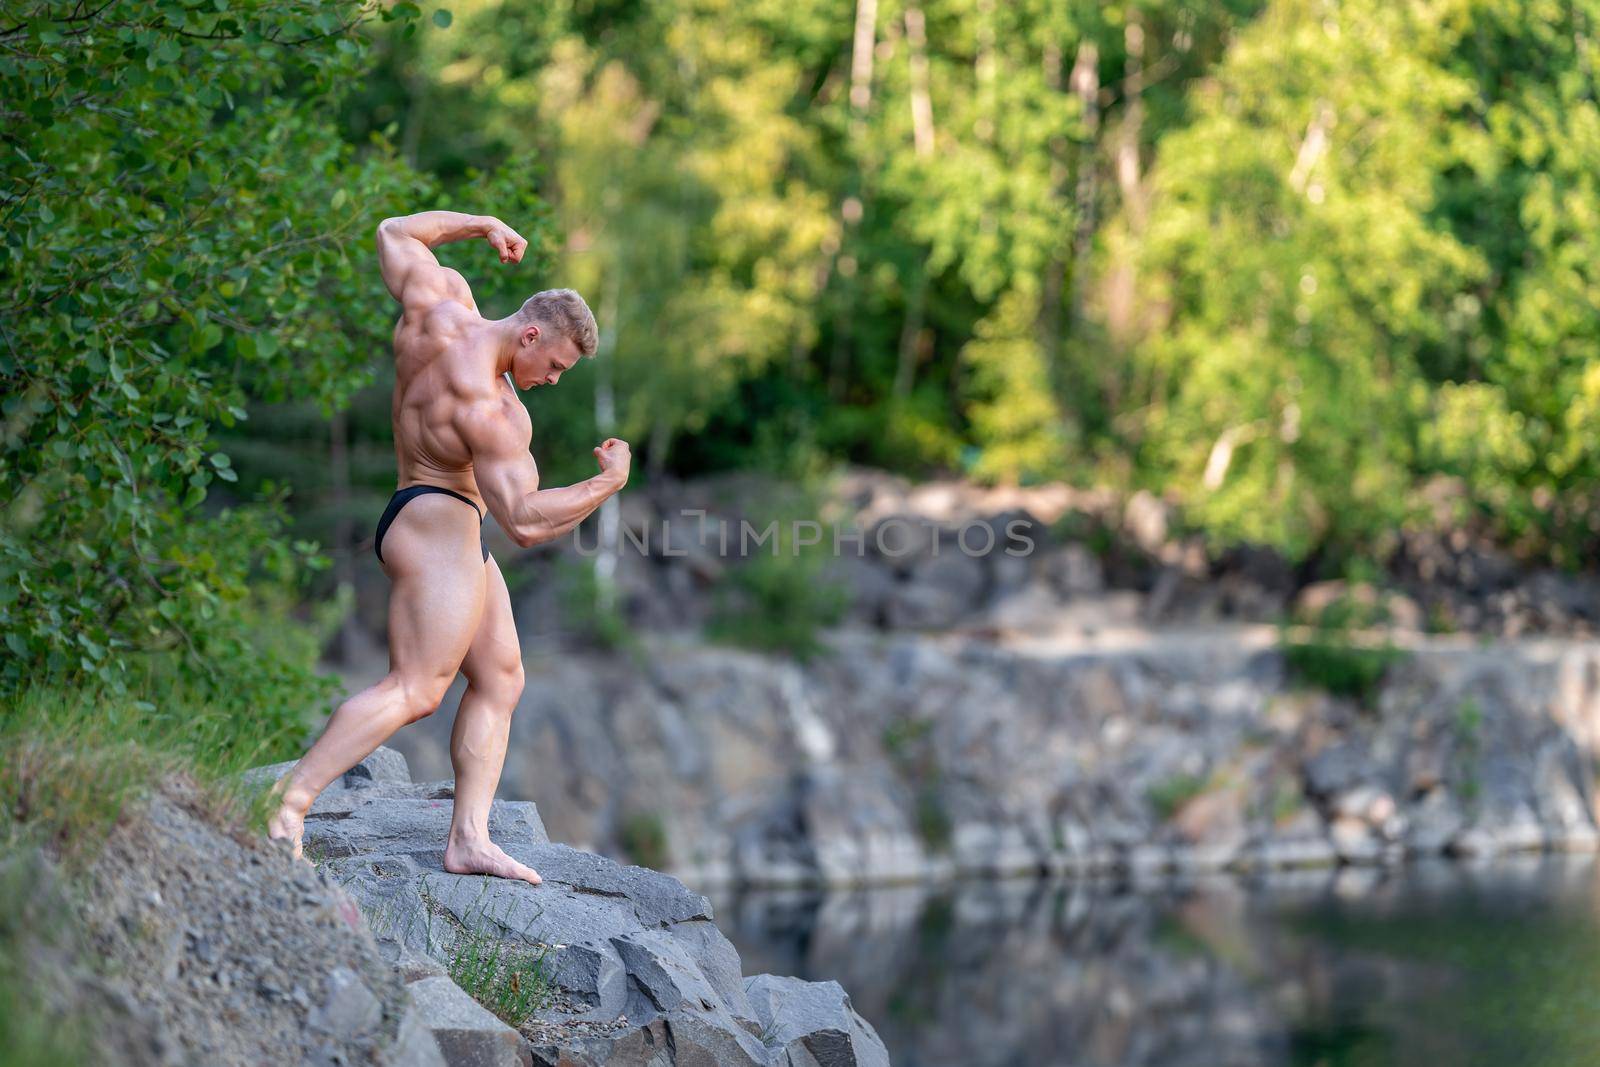 male bodybuilder by the water in nature by Edophoto